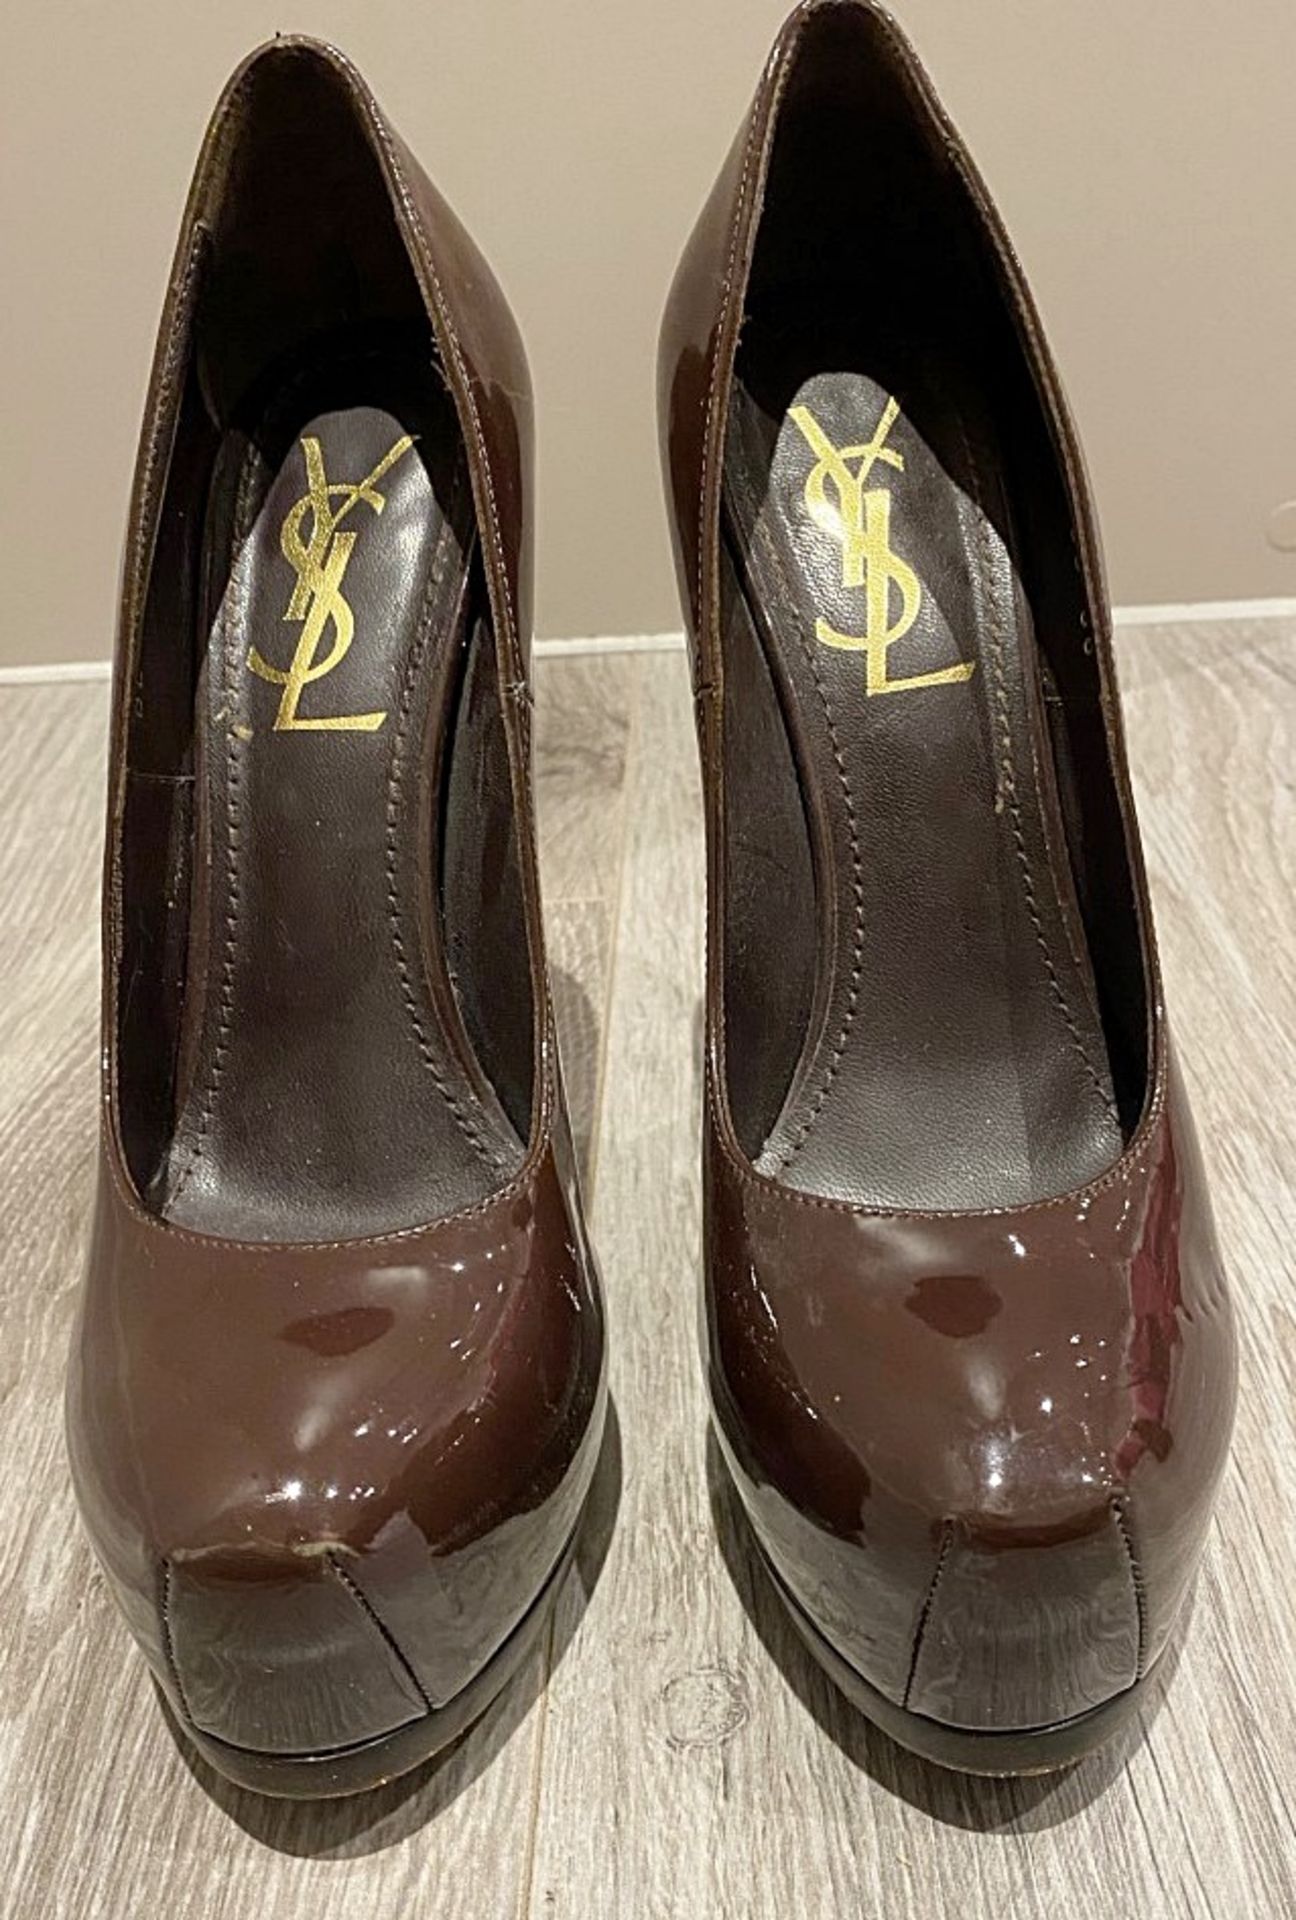 1 x Pair Of Genuine YSL High Heel Shoes In Brown - Size: 36 - Preowned in Good Condition - Ref: LOT4 - Image 3 of 4